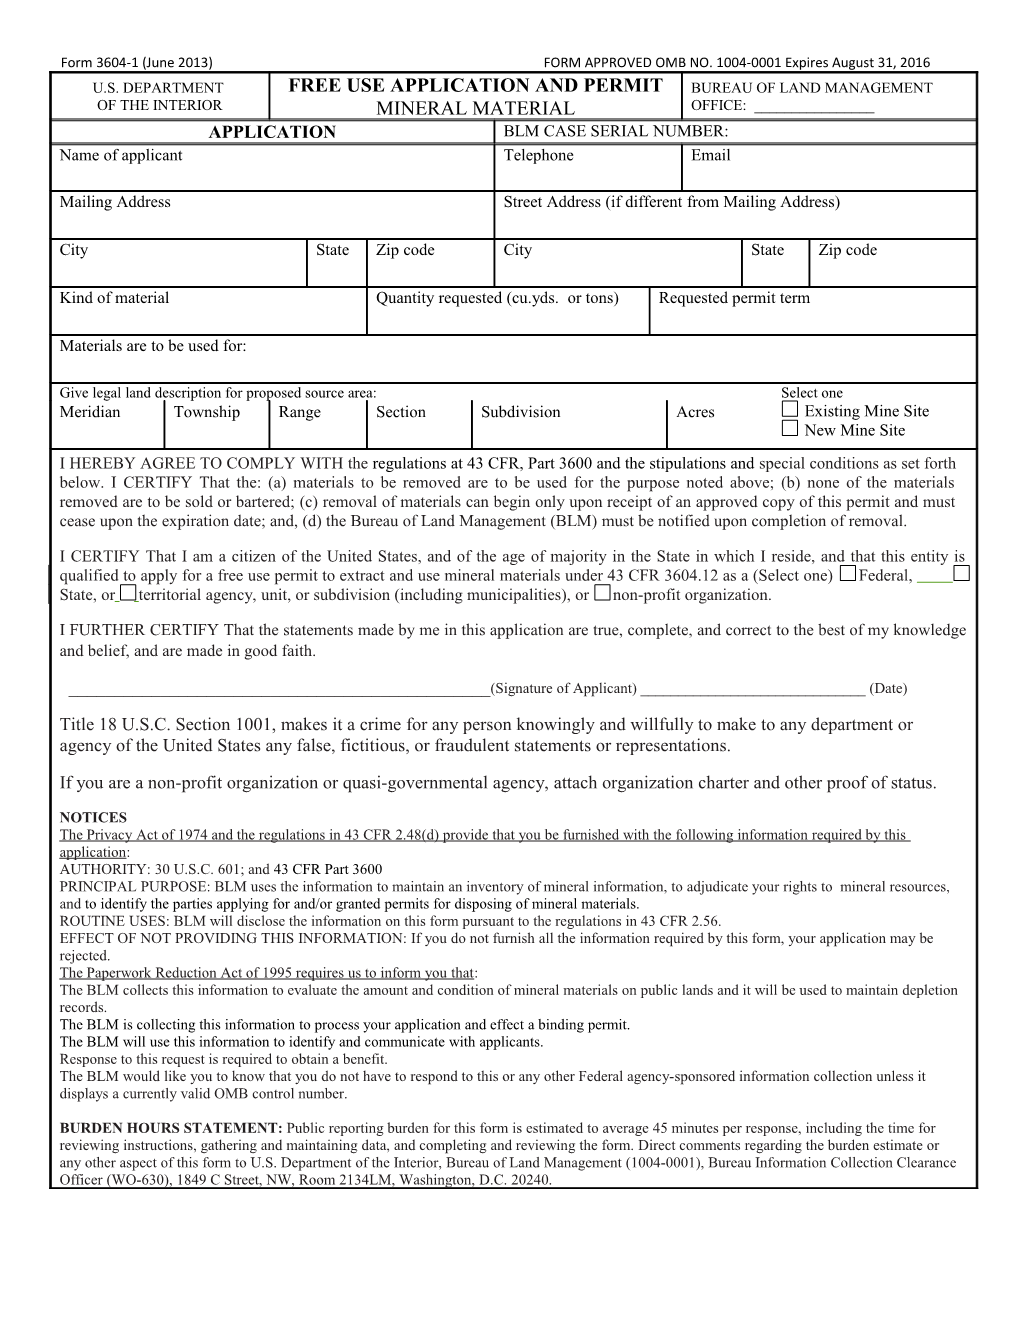 Form 3604-1 (June 2013)FORM APPROVEDOMB NO. 1004-0001Expires August 31, 2016